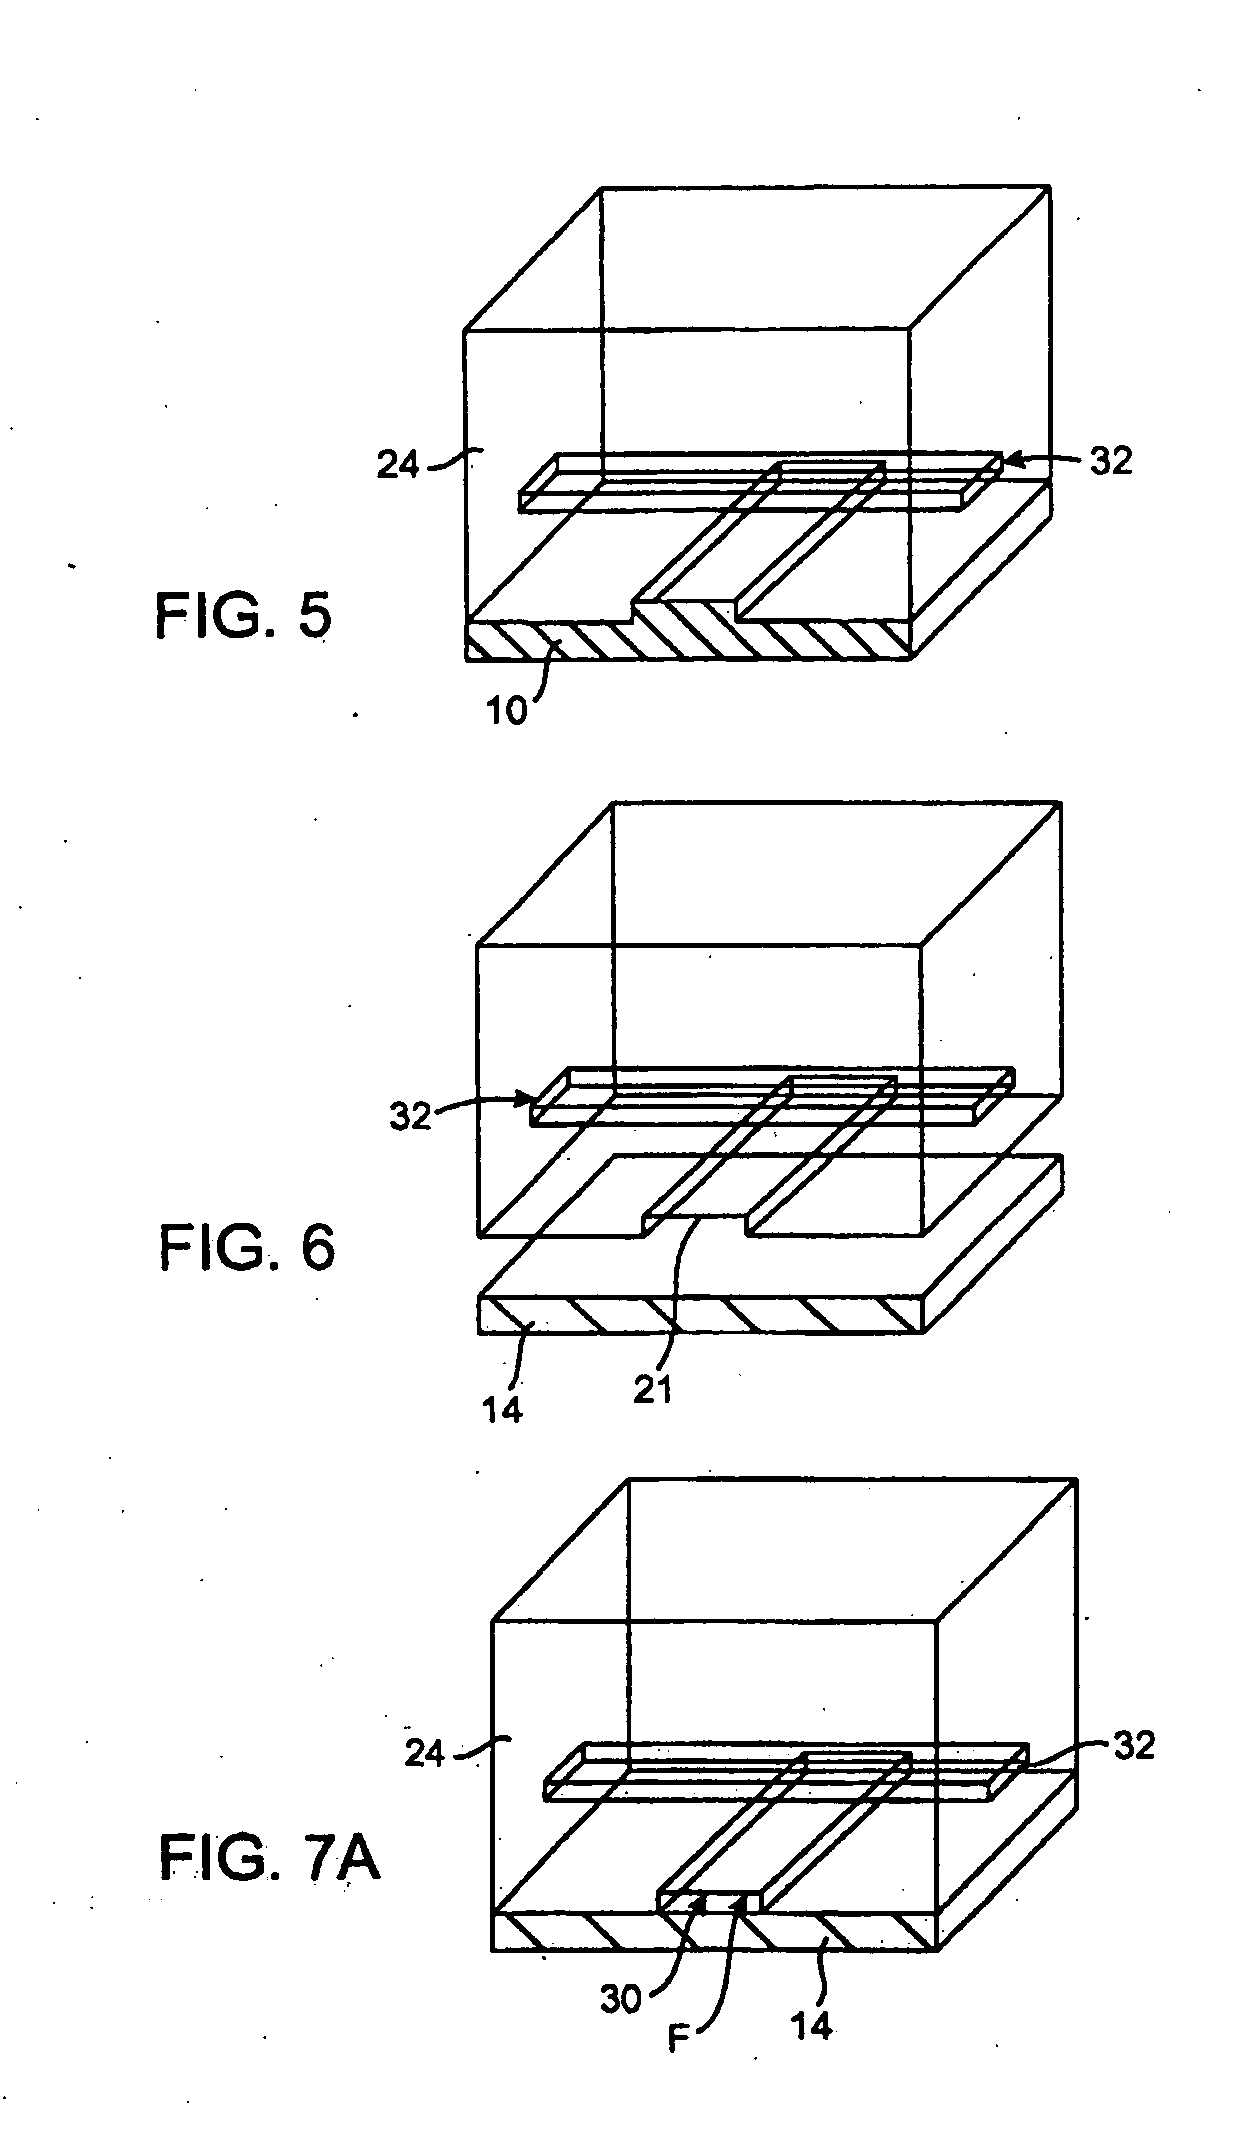 Crystal growth devices and systems, and methods for using same